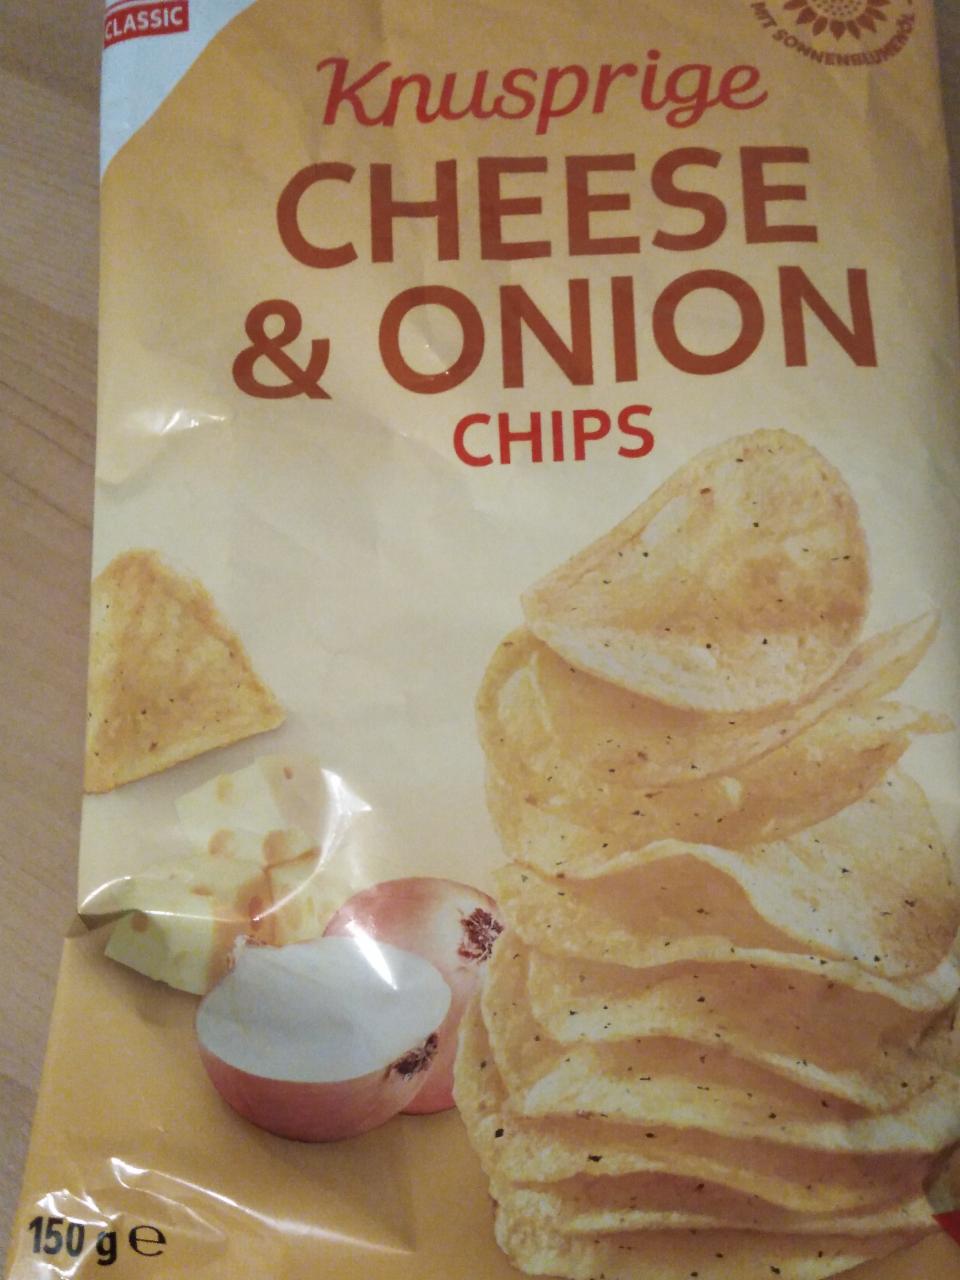 Fotografie - Knusprige cheese & onion chips K-Classic